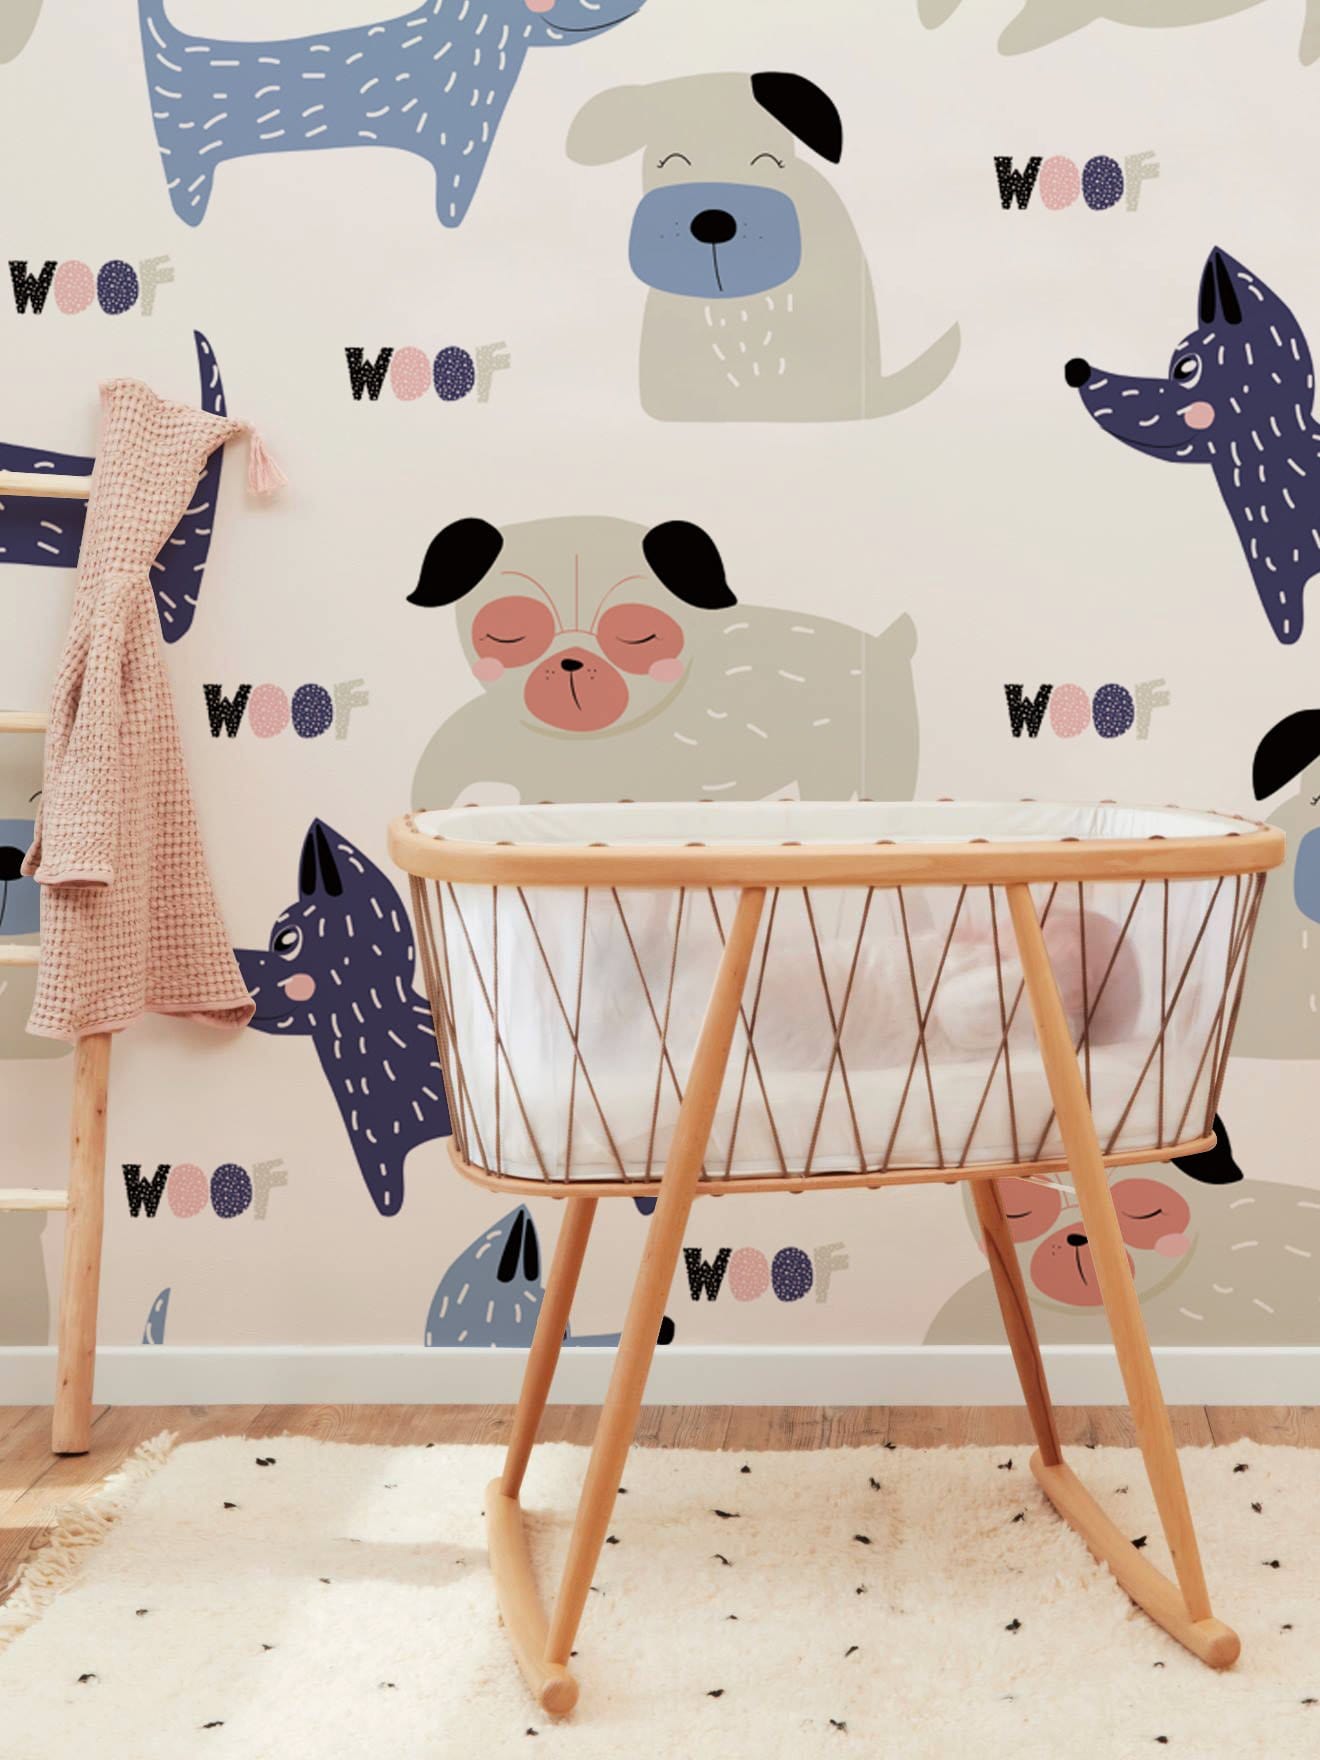 Decorate your nursery with this adorable Cartoon Dog Wallpaper Mural.